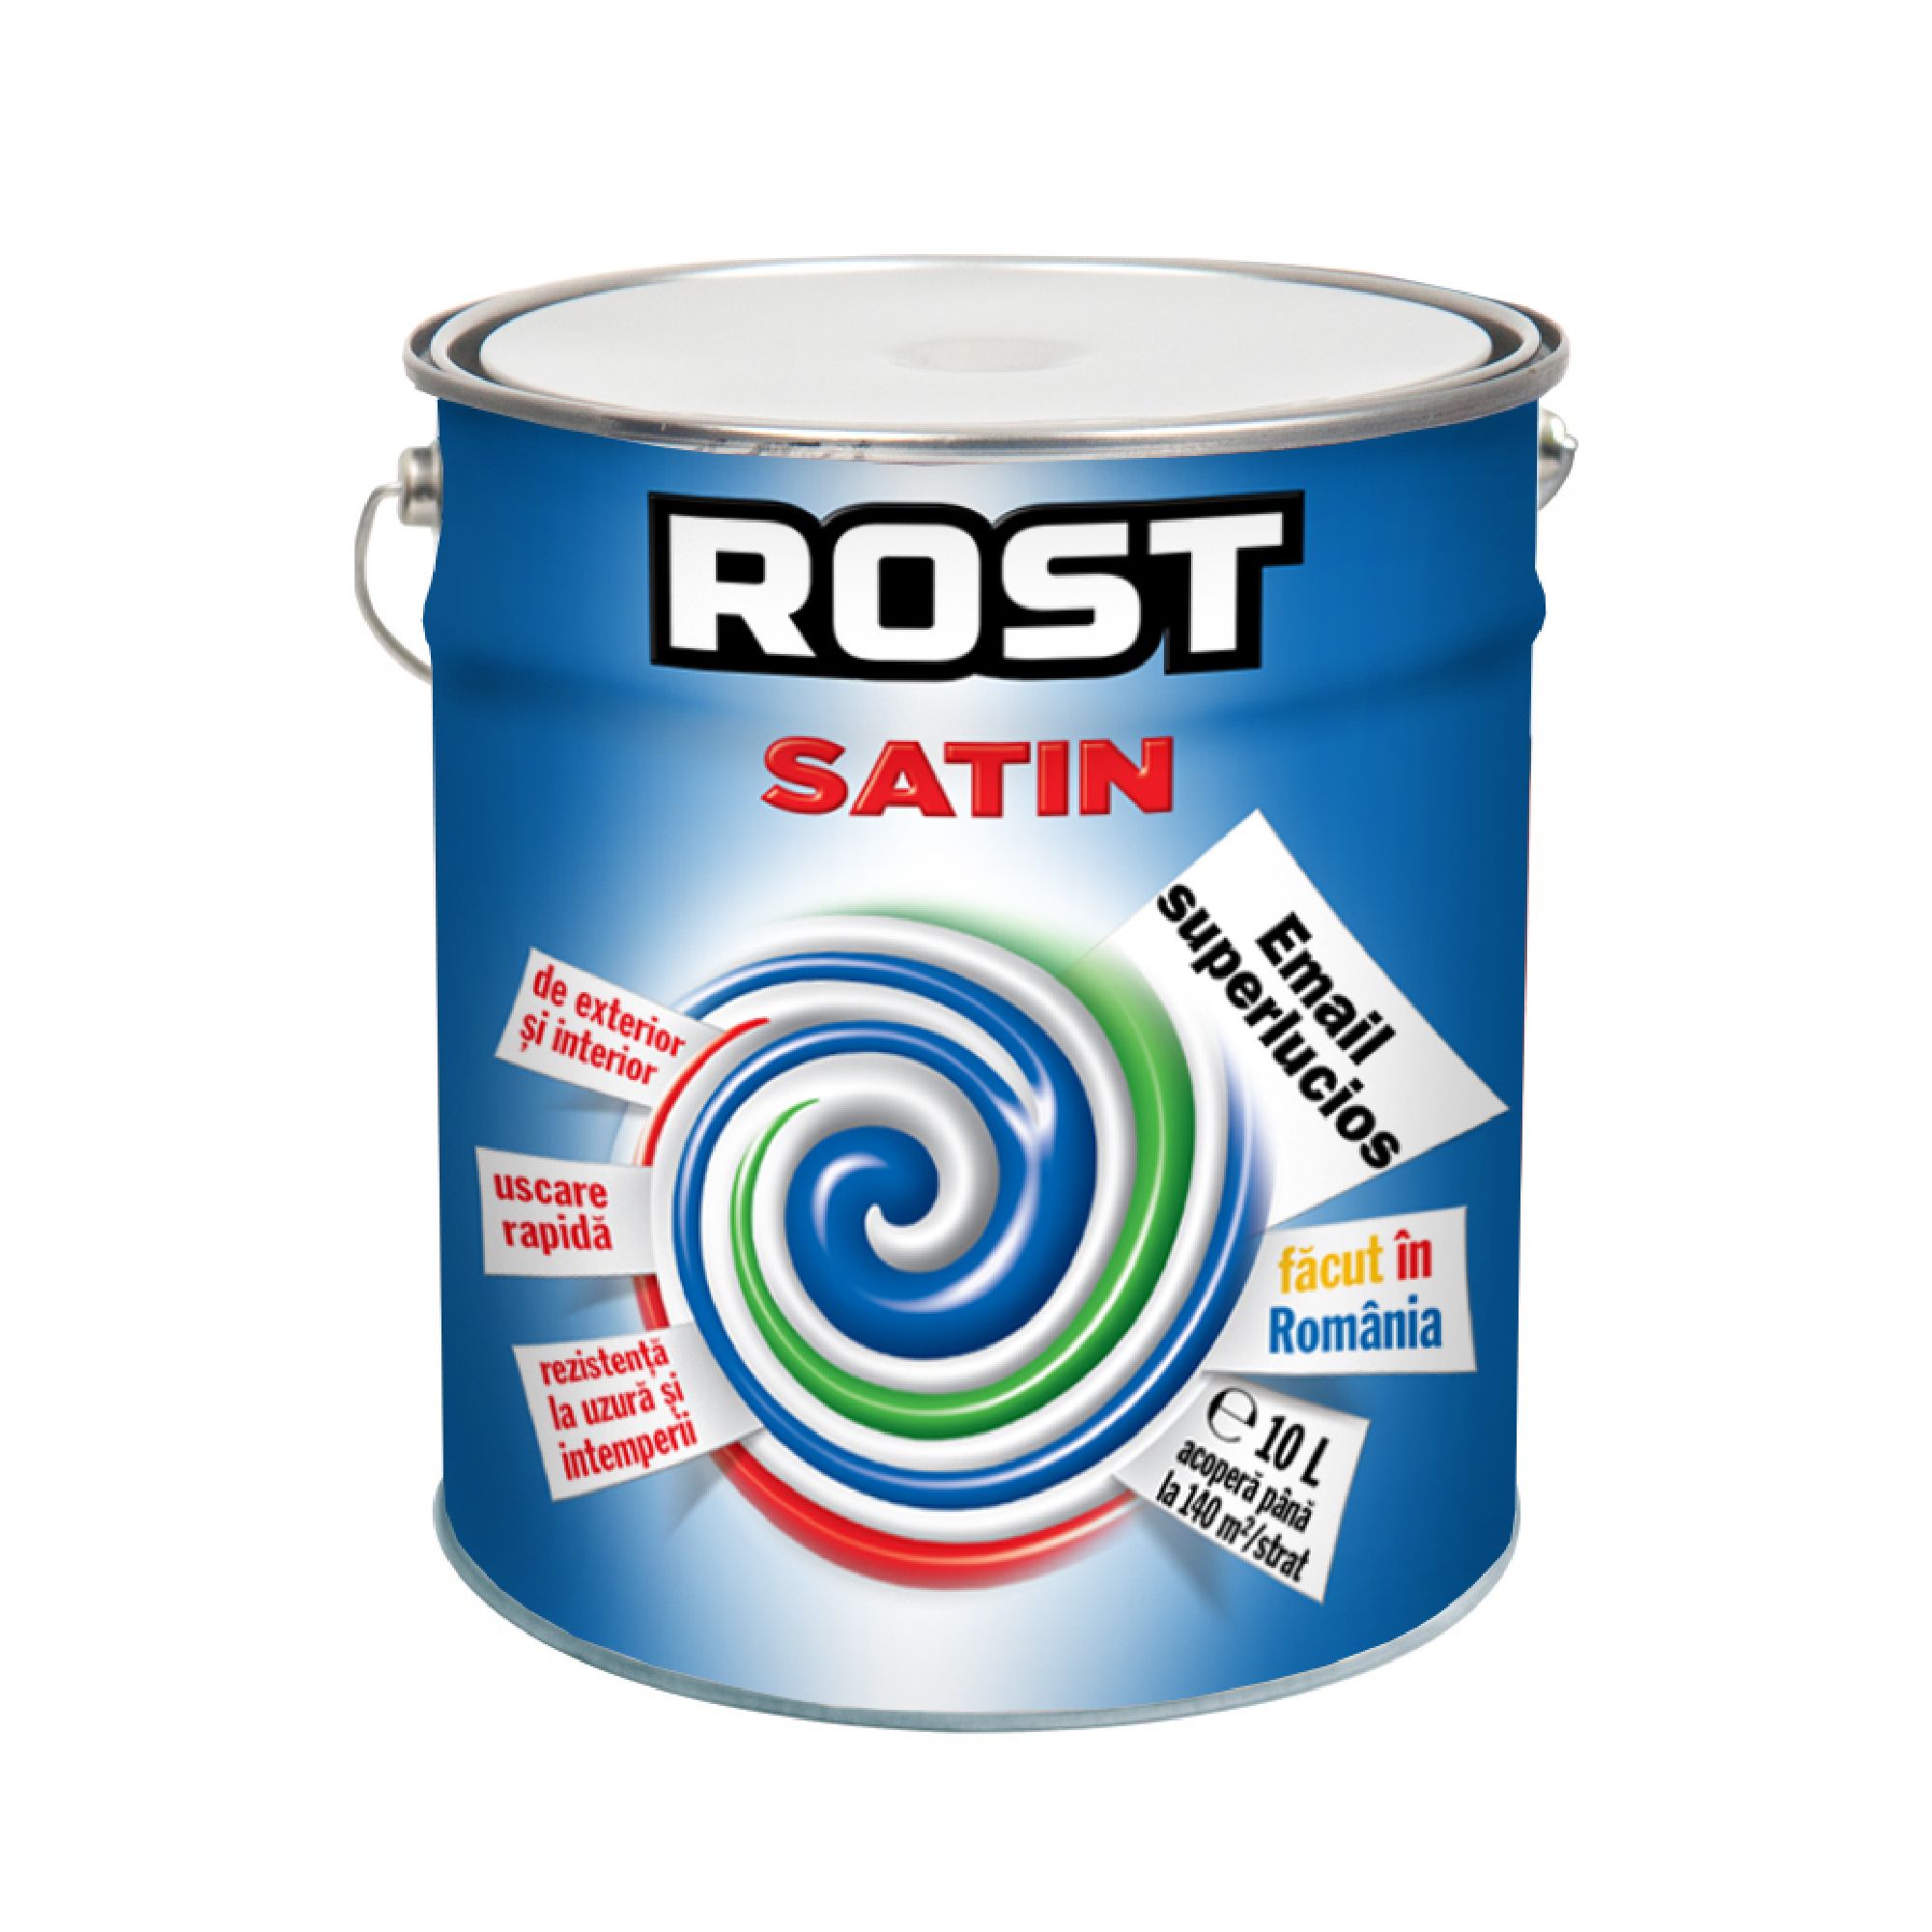 Paints - White Superglossy Paint for Wood/Metal Rost Satin 10L, https:maxbau.ro